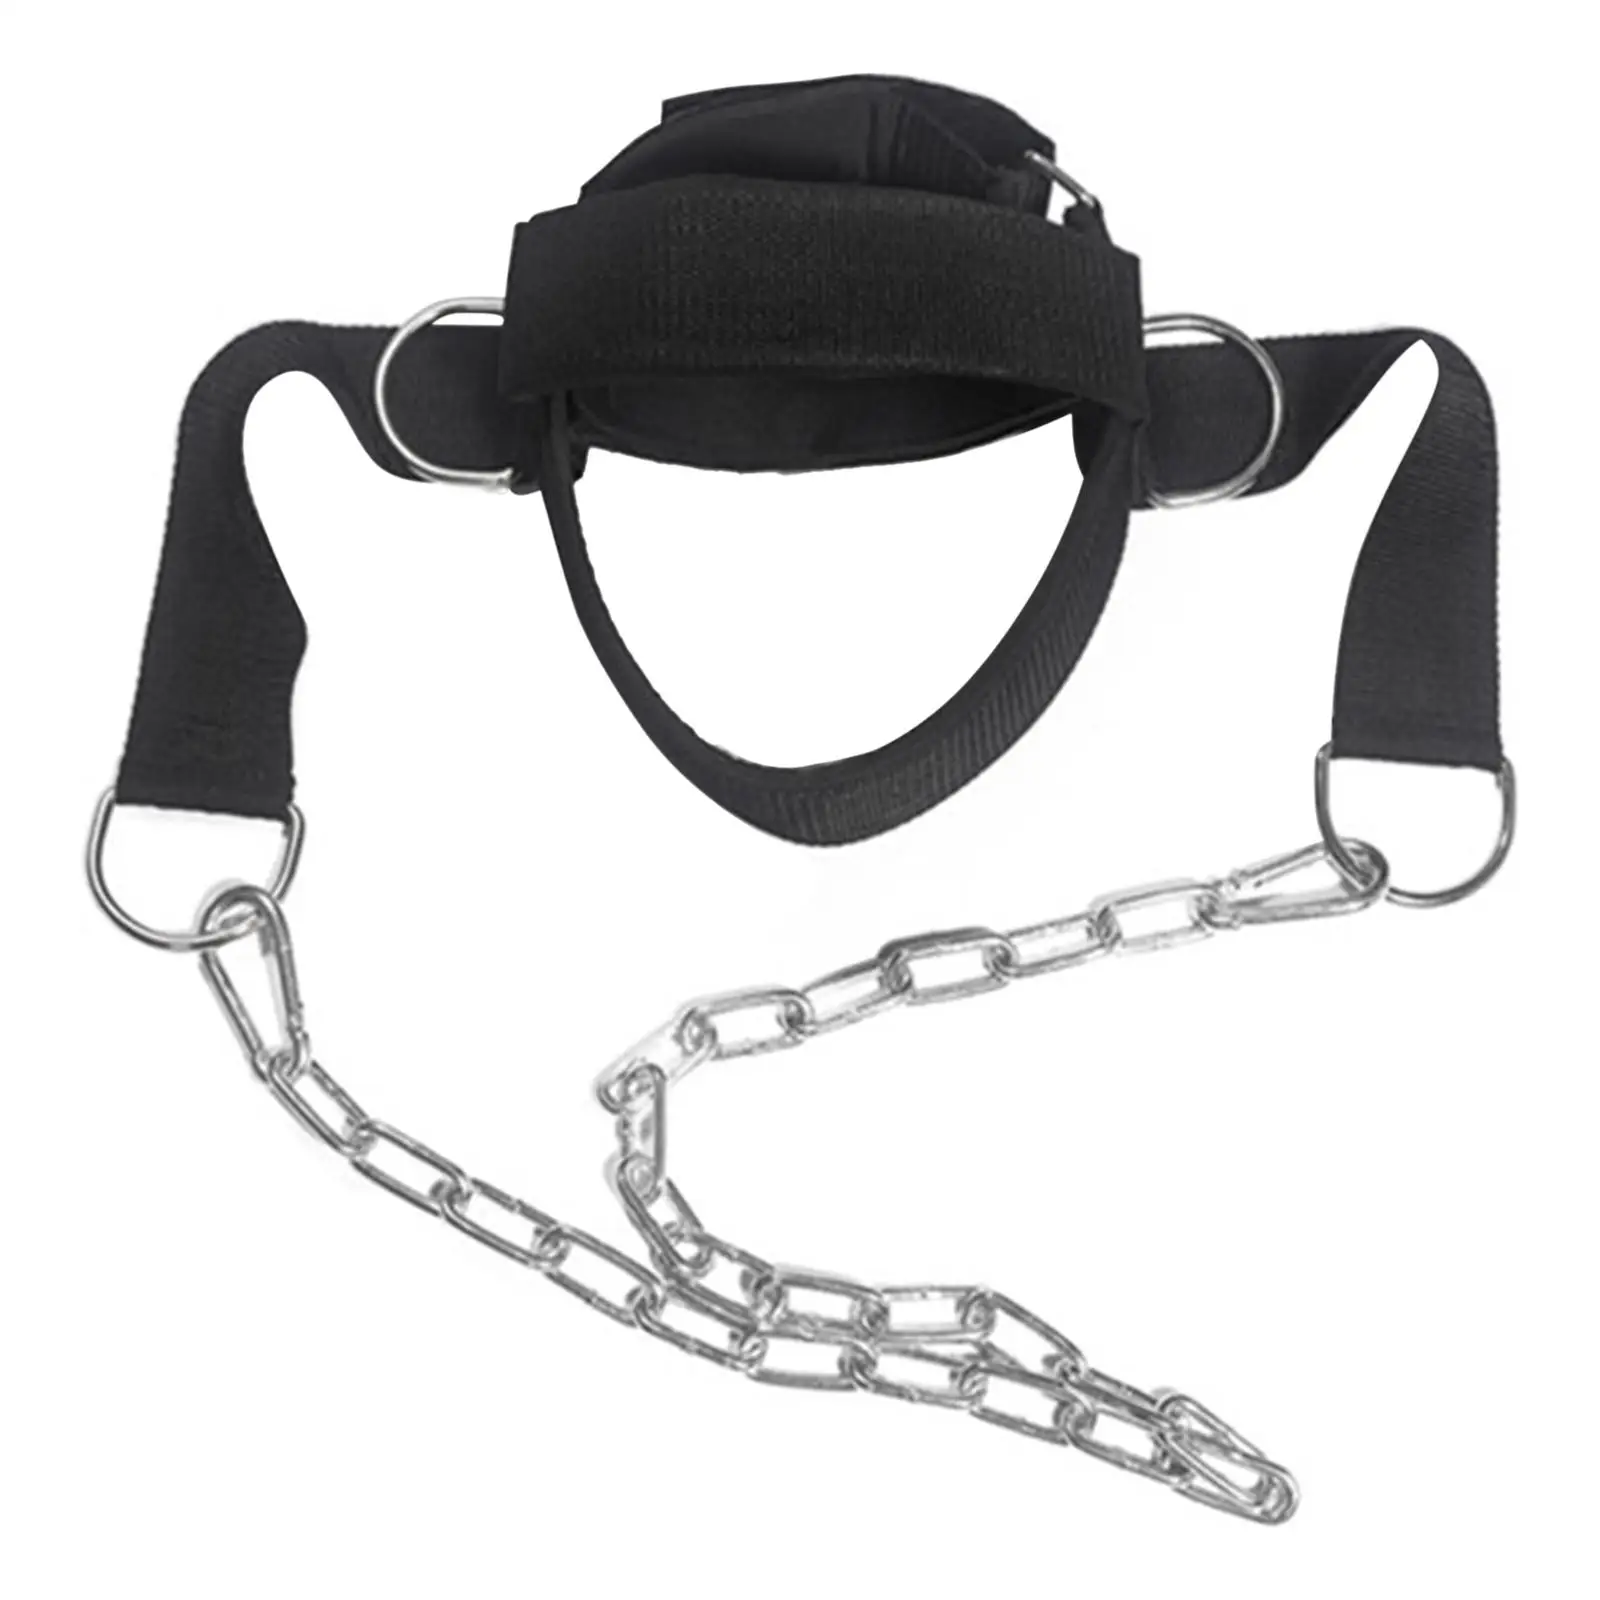 1PC Head Neck Harness Durable Strengh Exercise Strap for Weight Lifting Gym